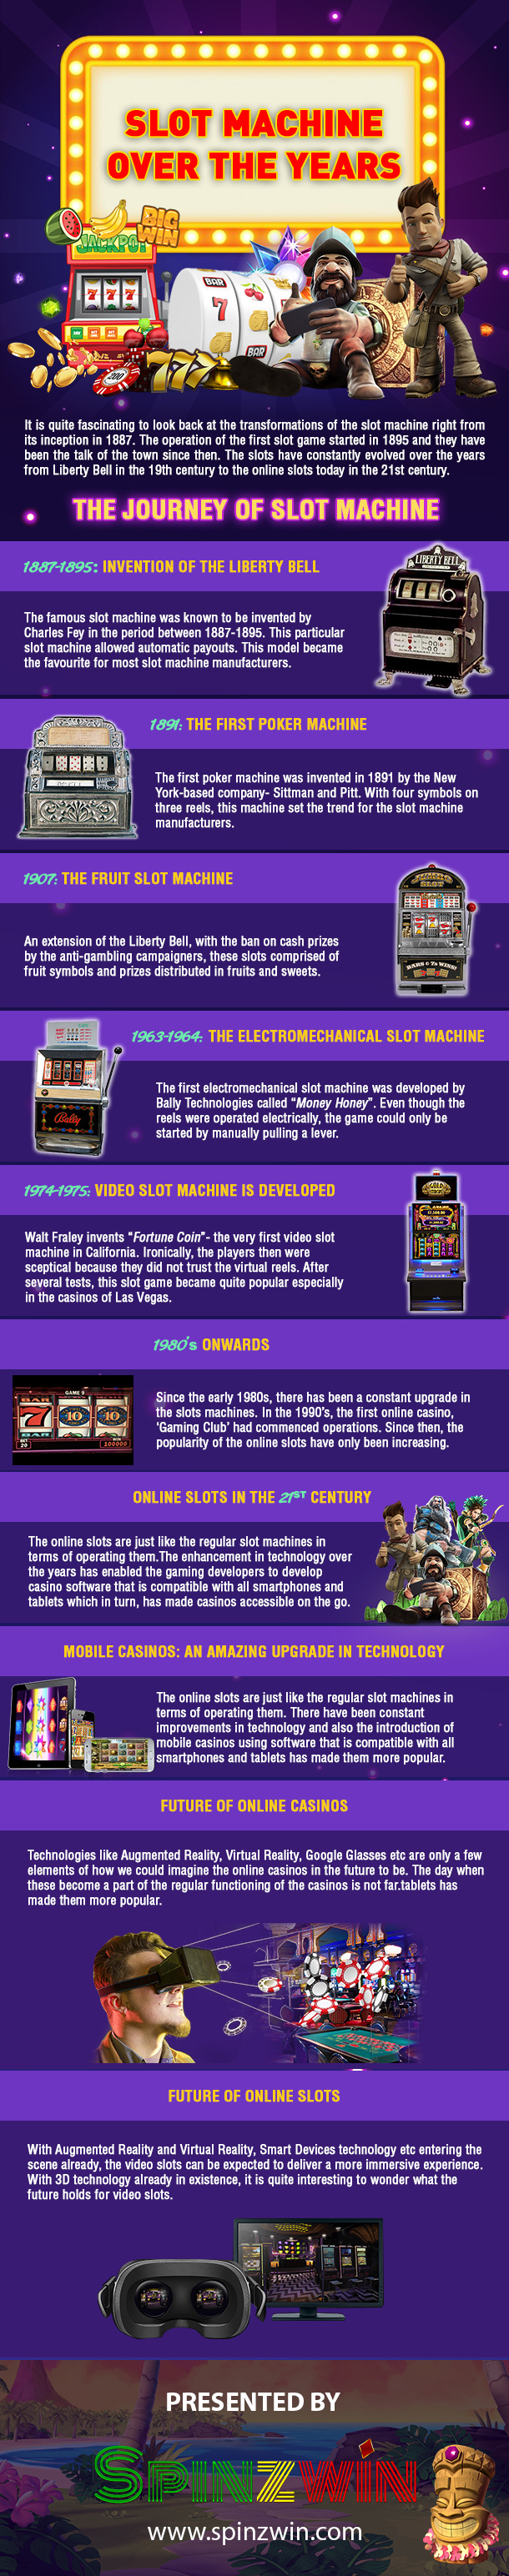 The Journey of Online Slots Machine (so far)